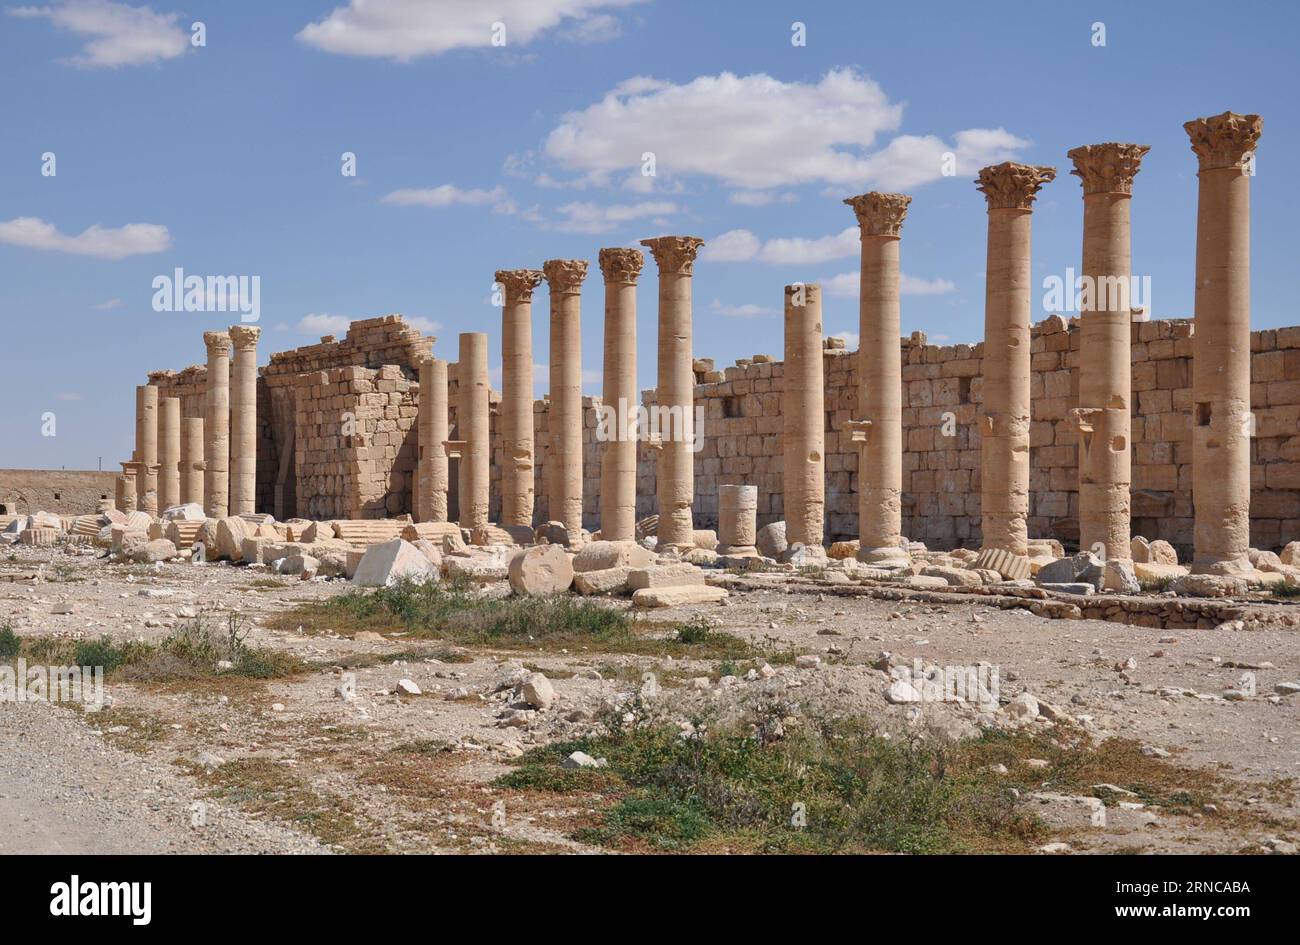 (160331) -- PALMYRA, March 31, 2016 -- Partially damaged ancient columns are seen at the National Museum in the ancient oasis caravan city of Palmyra in central Syria on March 31, 2016. The Syrian army recaptured the city of Palmyra on March 27 following intense battle against the Islamic State(IS) group, which has controlled the city since last May. ) SYRIA-PALMYRA-RUINS Ammar PUBLICATIONxNOTxINxCHN   160331 Palmyra March 31 2016 partially damaged Ancient Columns are Lakes AT The National Museum in The Ancient Oasis Caravan City of Palmyra in Central Syria ON March 31 2016 The Syrian Army rec Stock Photo